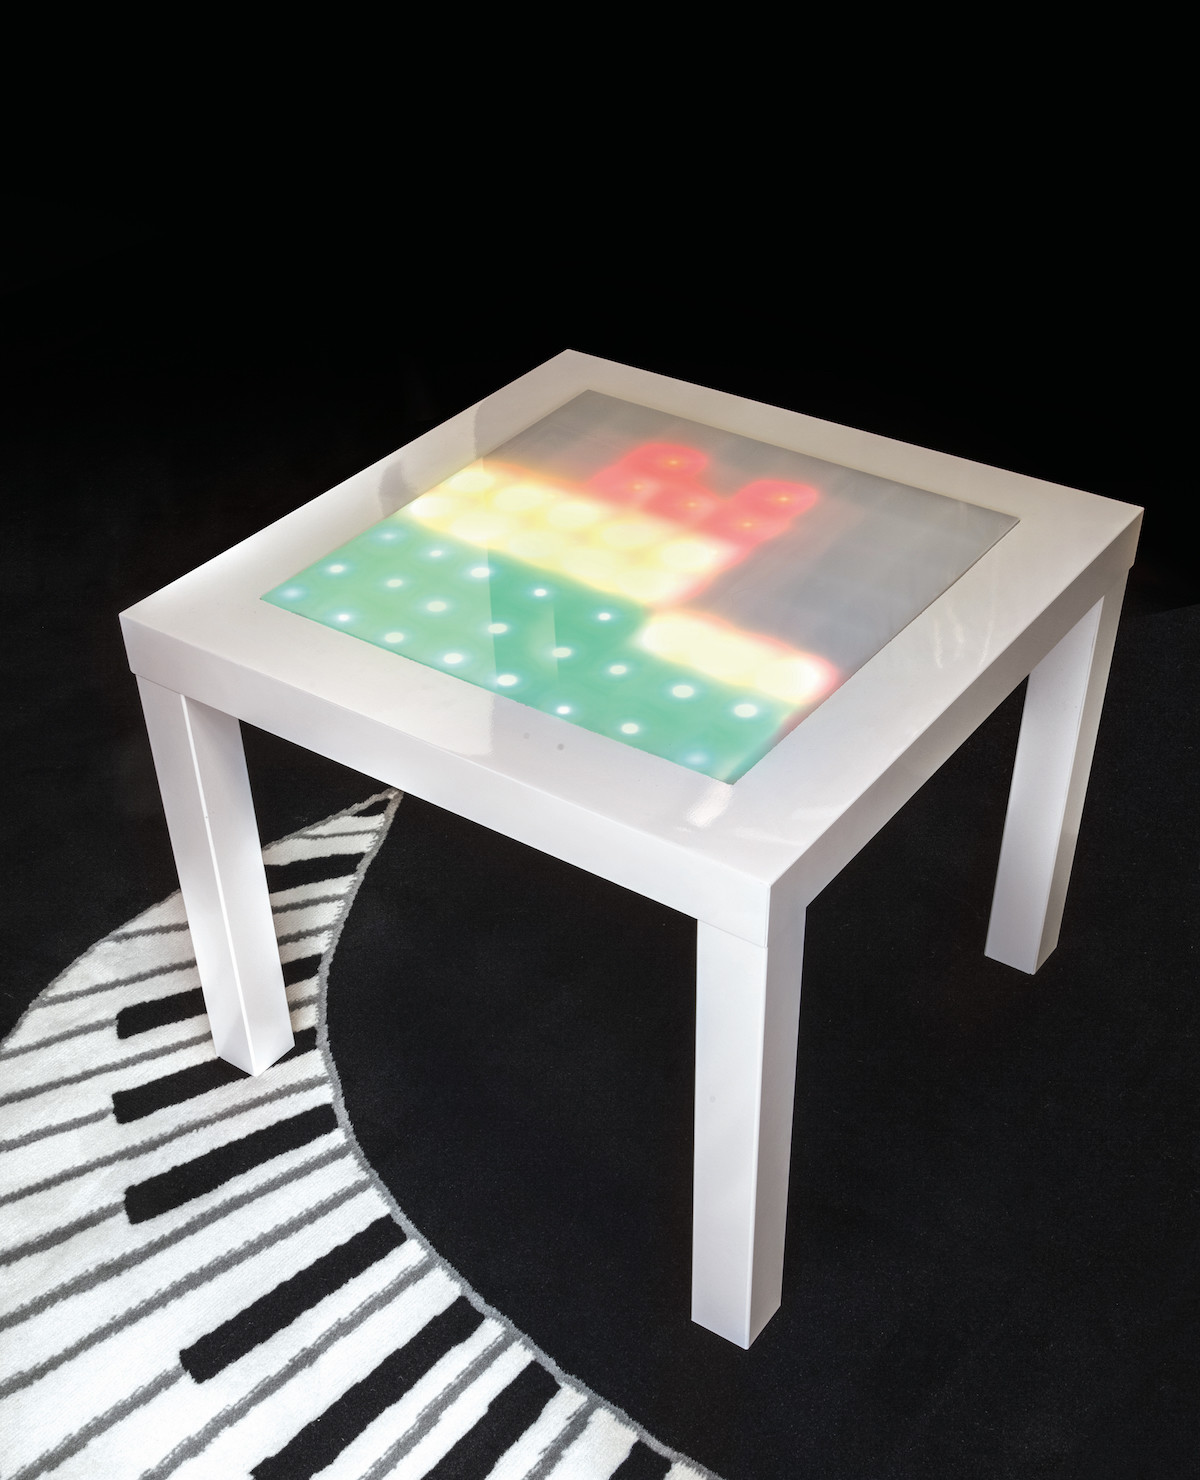 Transform an Ikea Side Table into a Music Visualizer